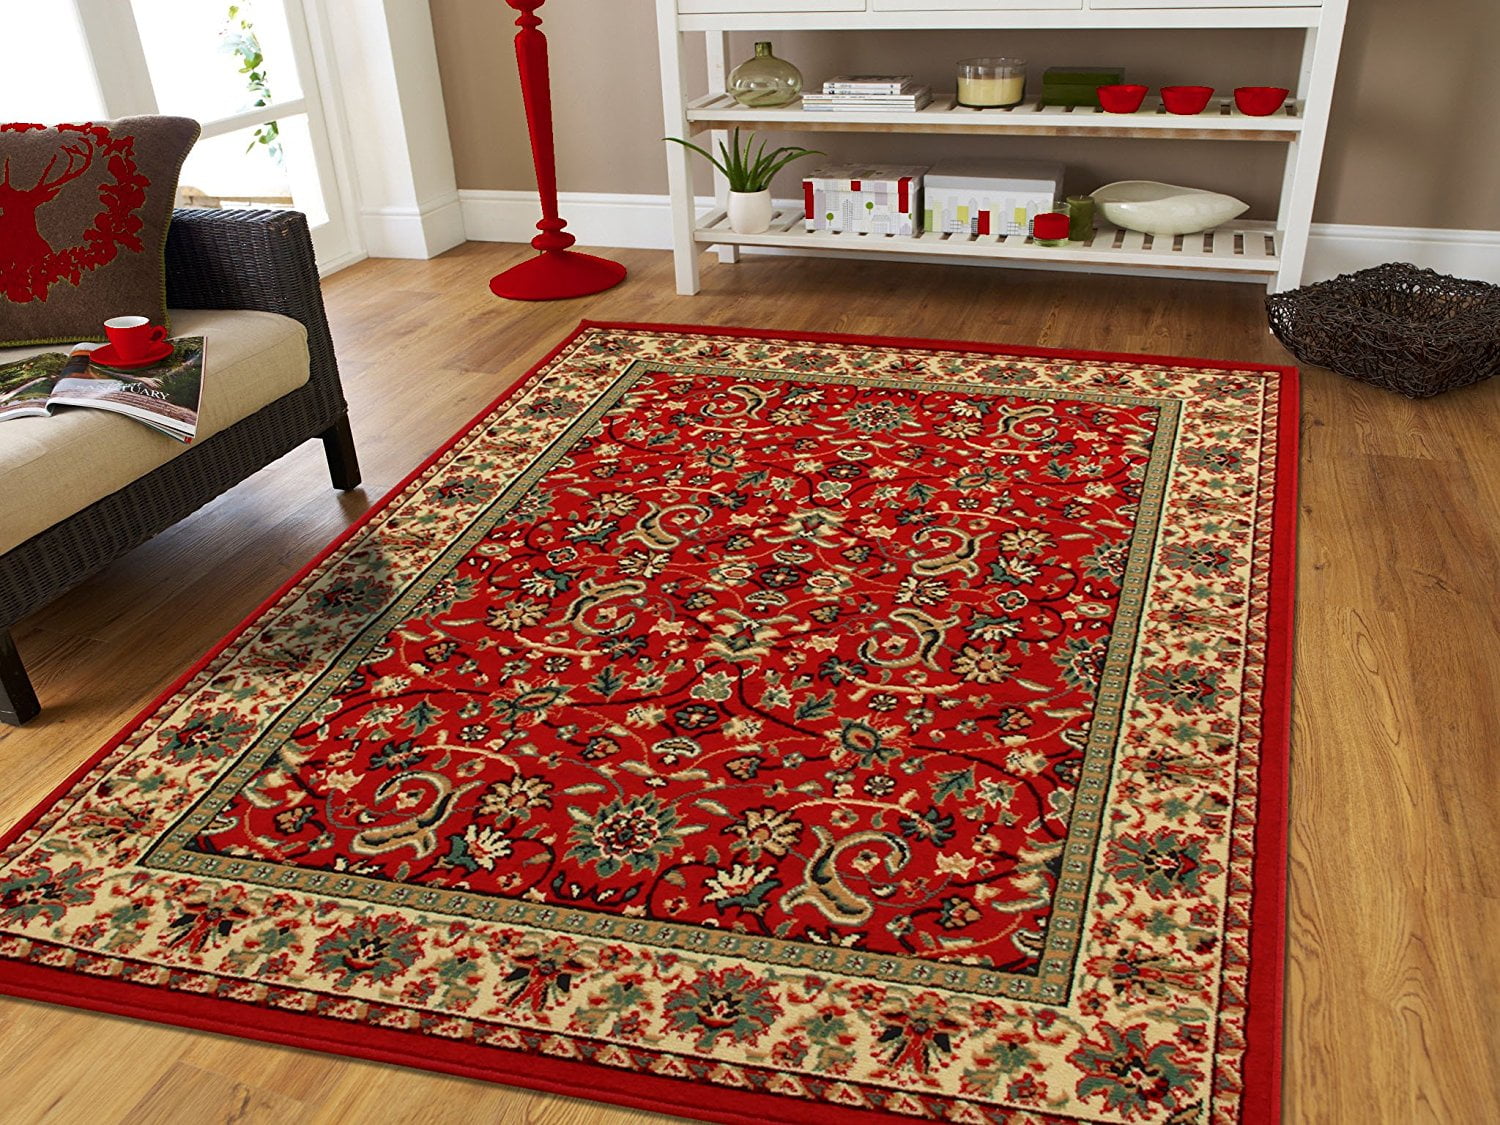 Luxury Persian style High Quality Large & Small Runner Rugs Carpets 